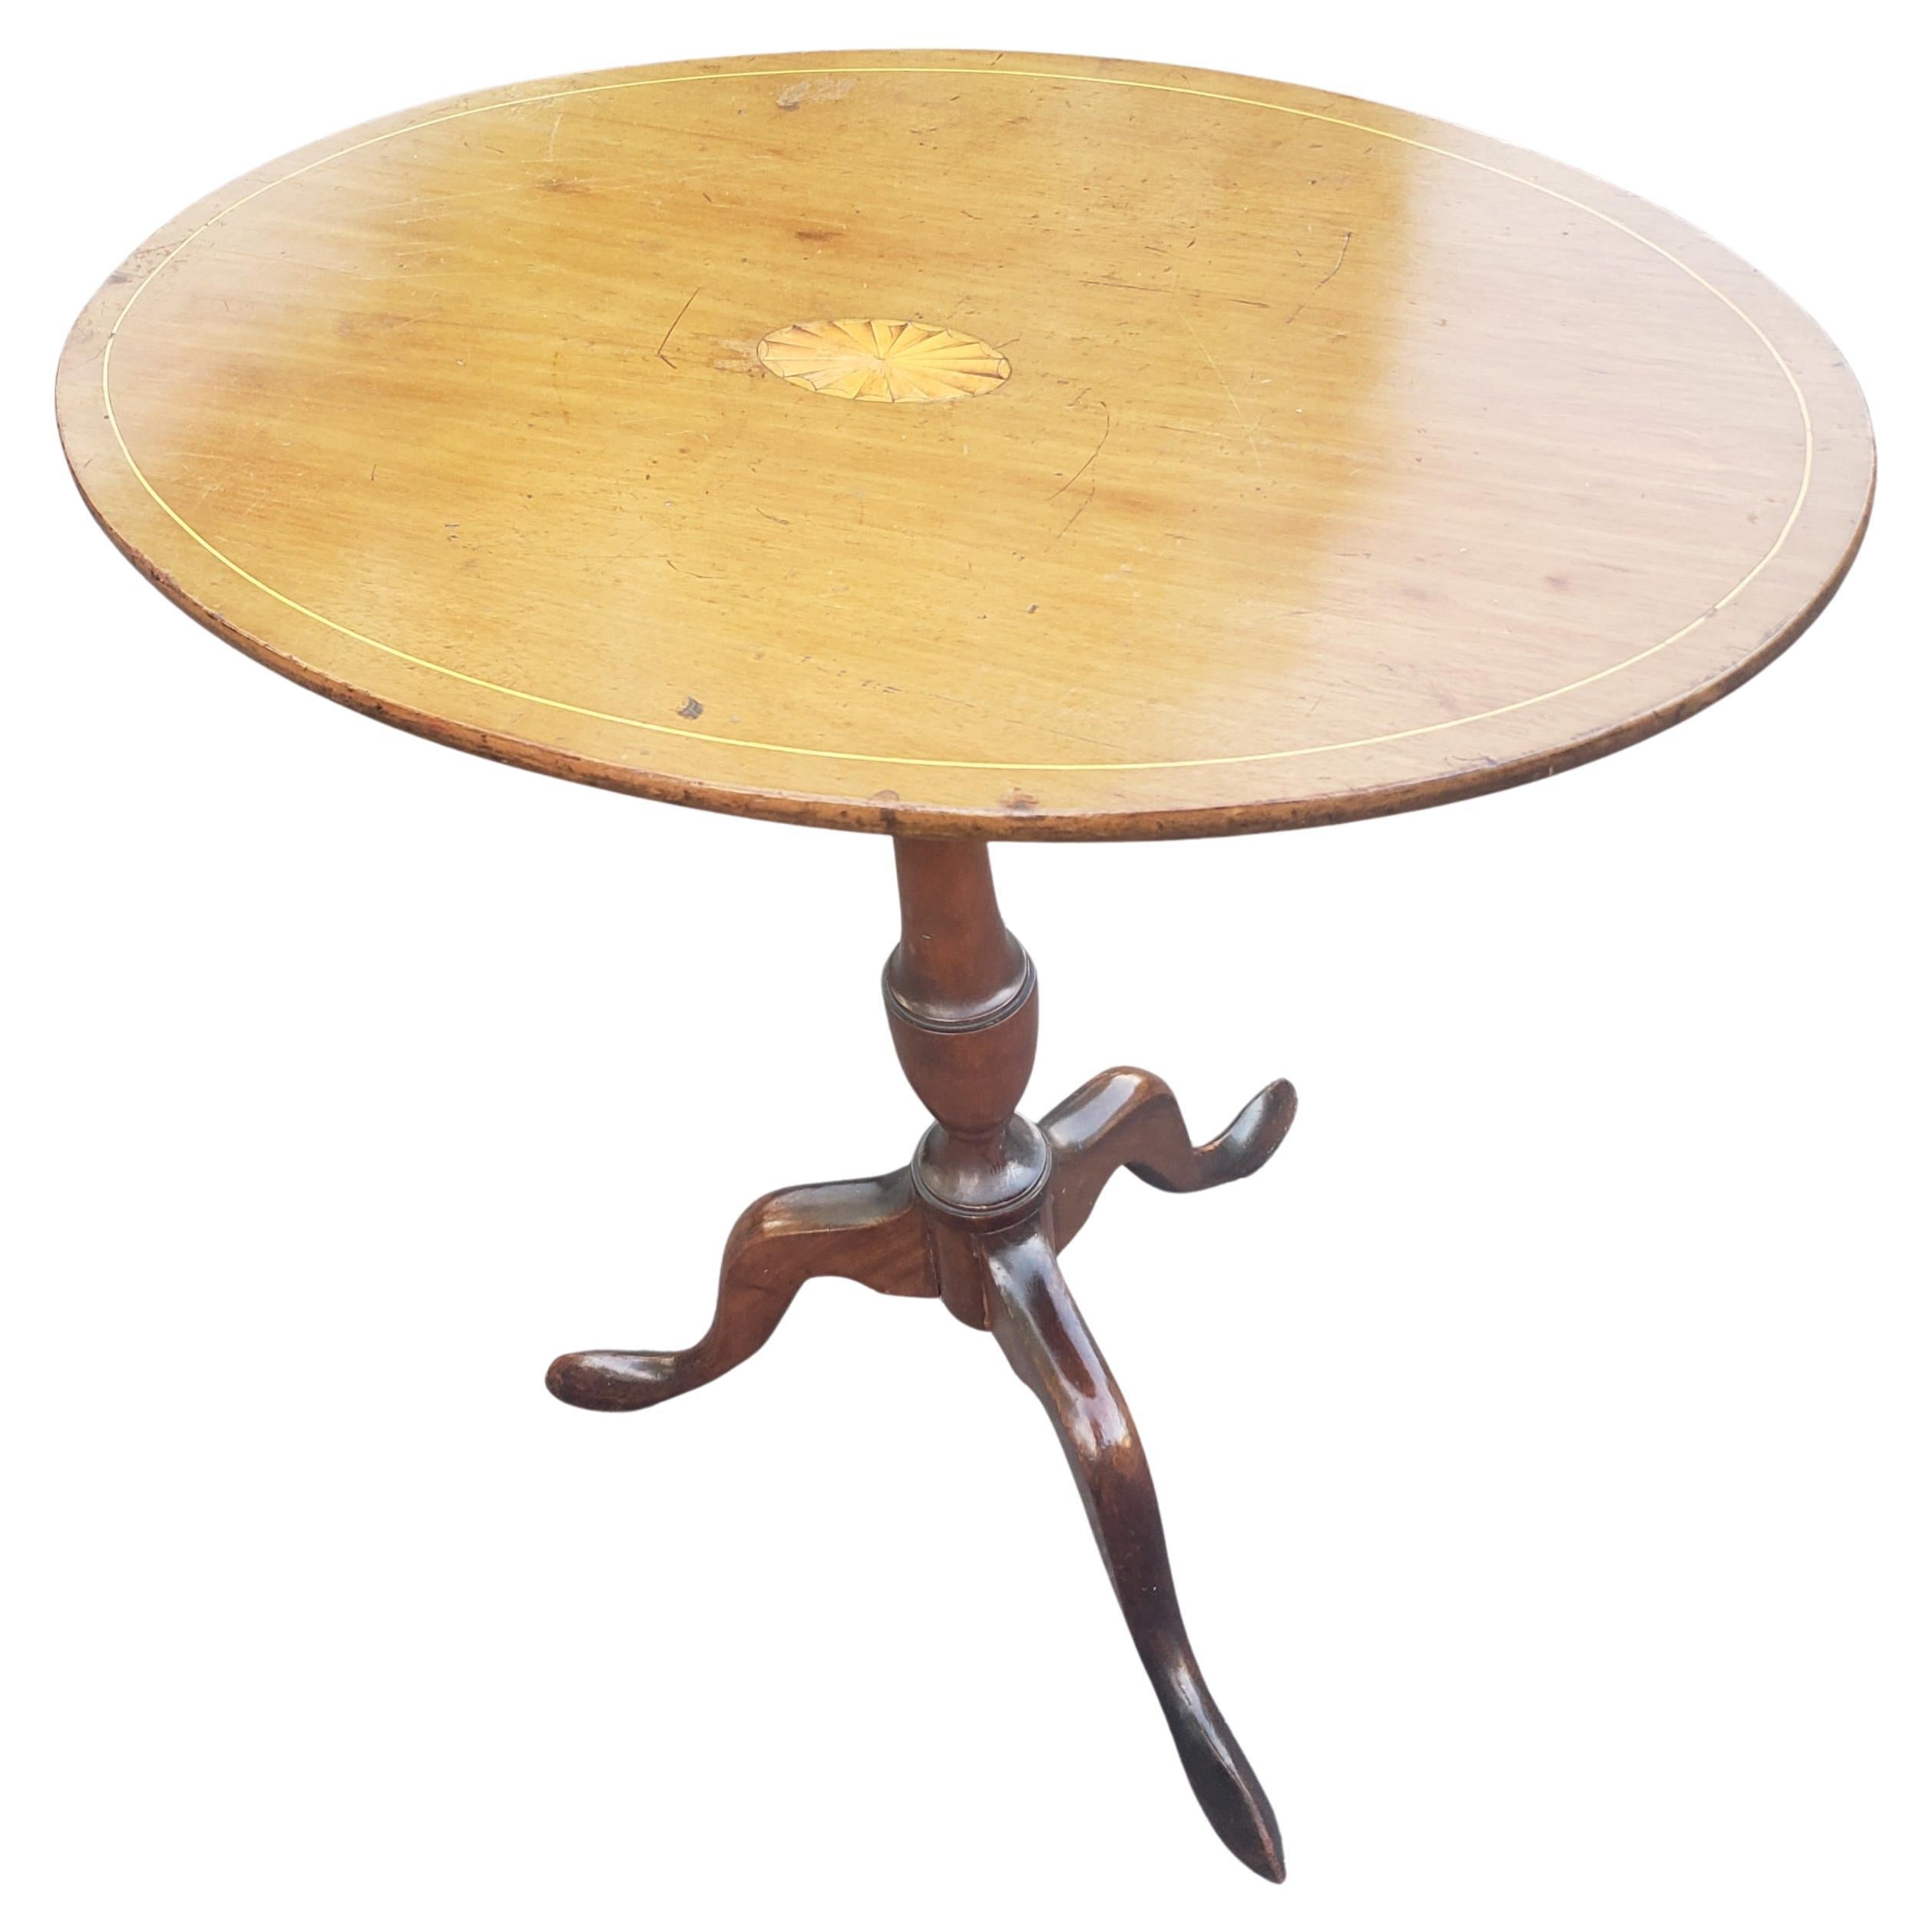 A 1930s Georgian style Mahogany and Satinwood Inlaid oval tilt-top side table on pedestal tripod and terminating with snake feet.
Measures 24